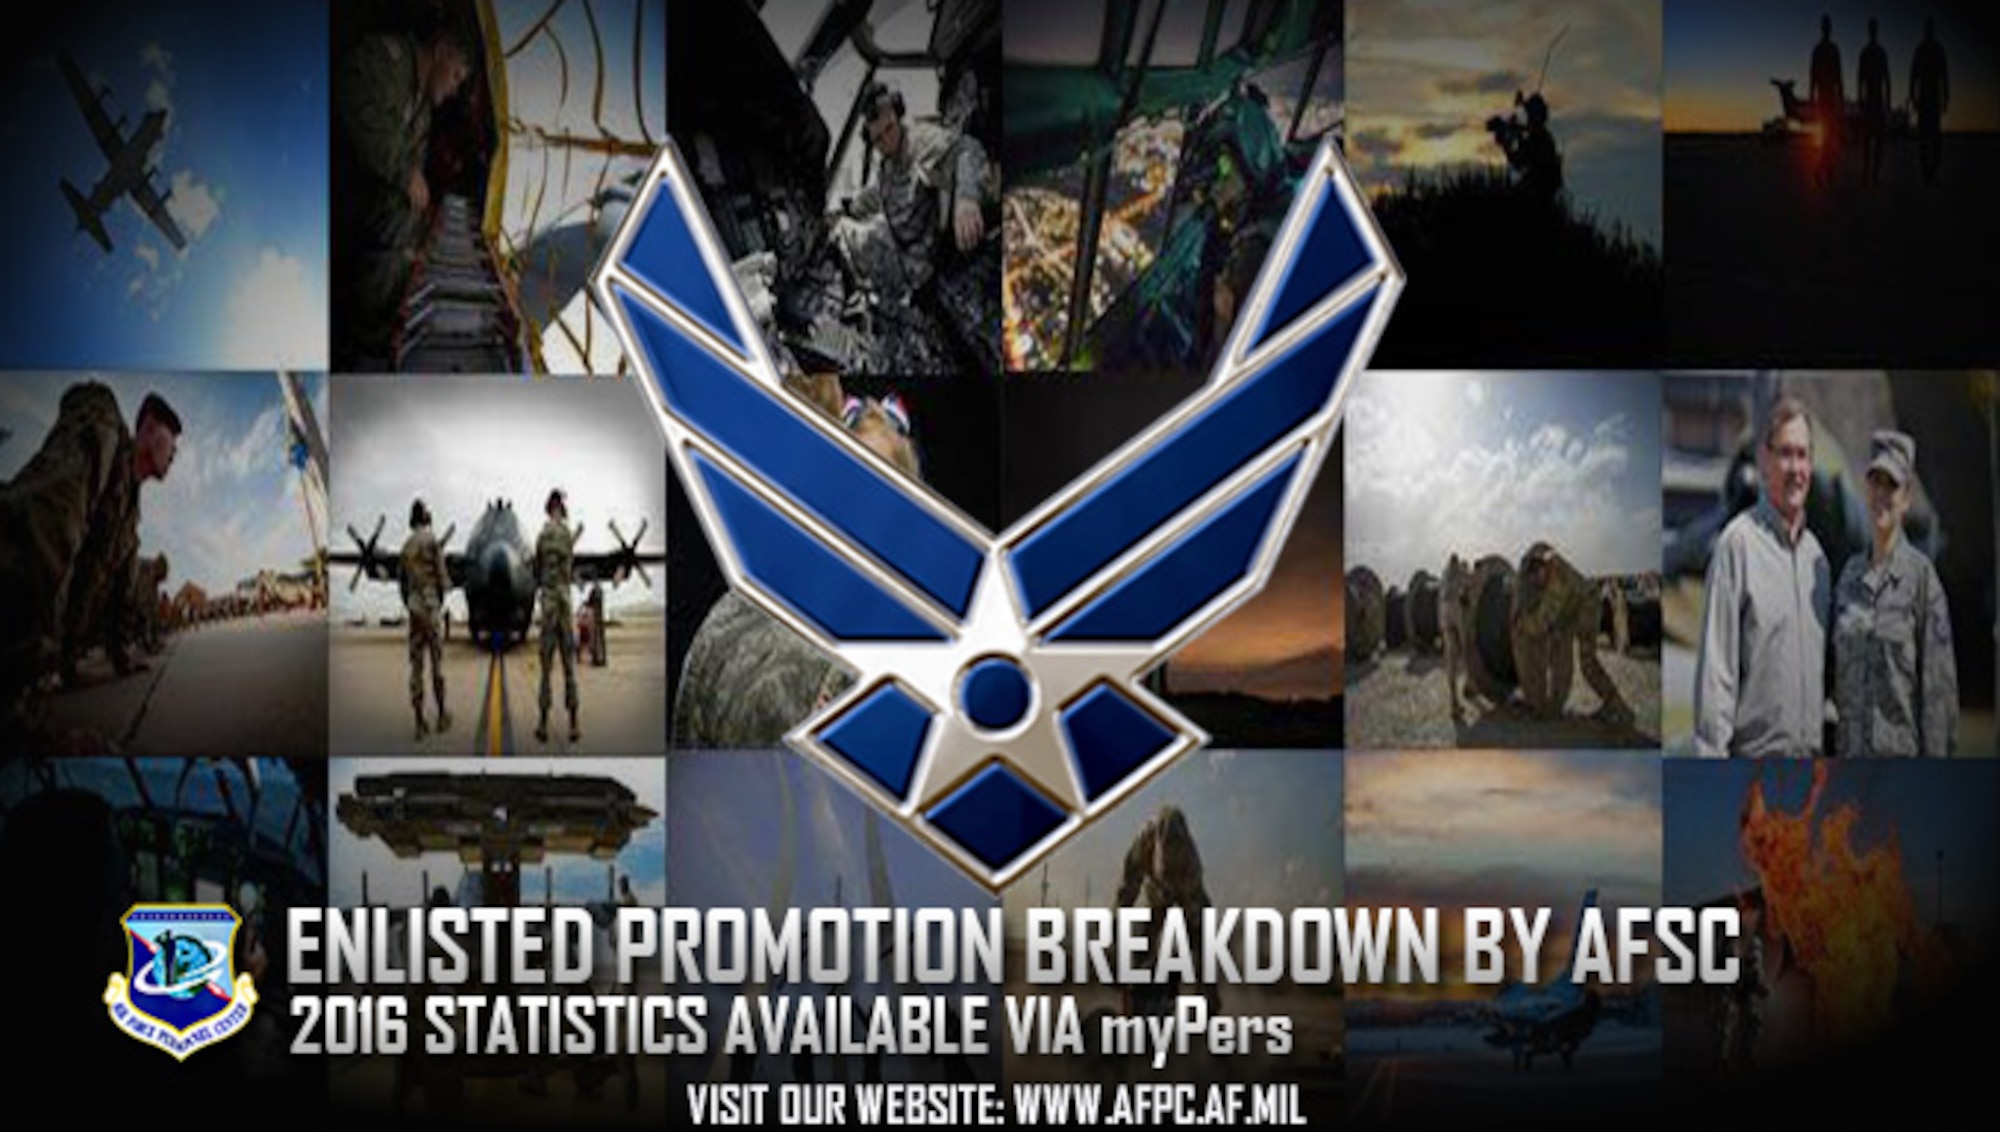 Promotion recommendation breakouts by Air Force Specialty Codes for the 16E5, 16E6, 16E7 promotion cycles are now available on myPers. The released data encompasses the first round of promotions since the enlisted evaluation system overhaul took place starting in 2014. (U.S. Air Force graphic by Staff Sgt. Alexx Pons)